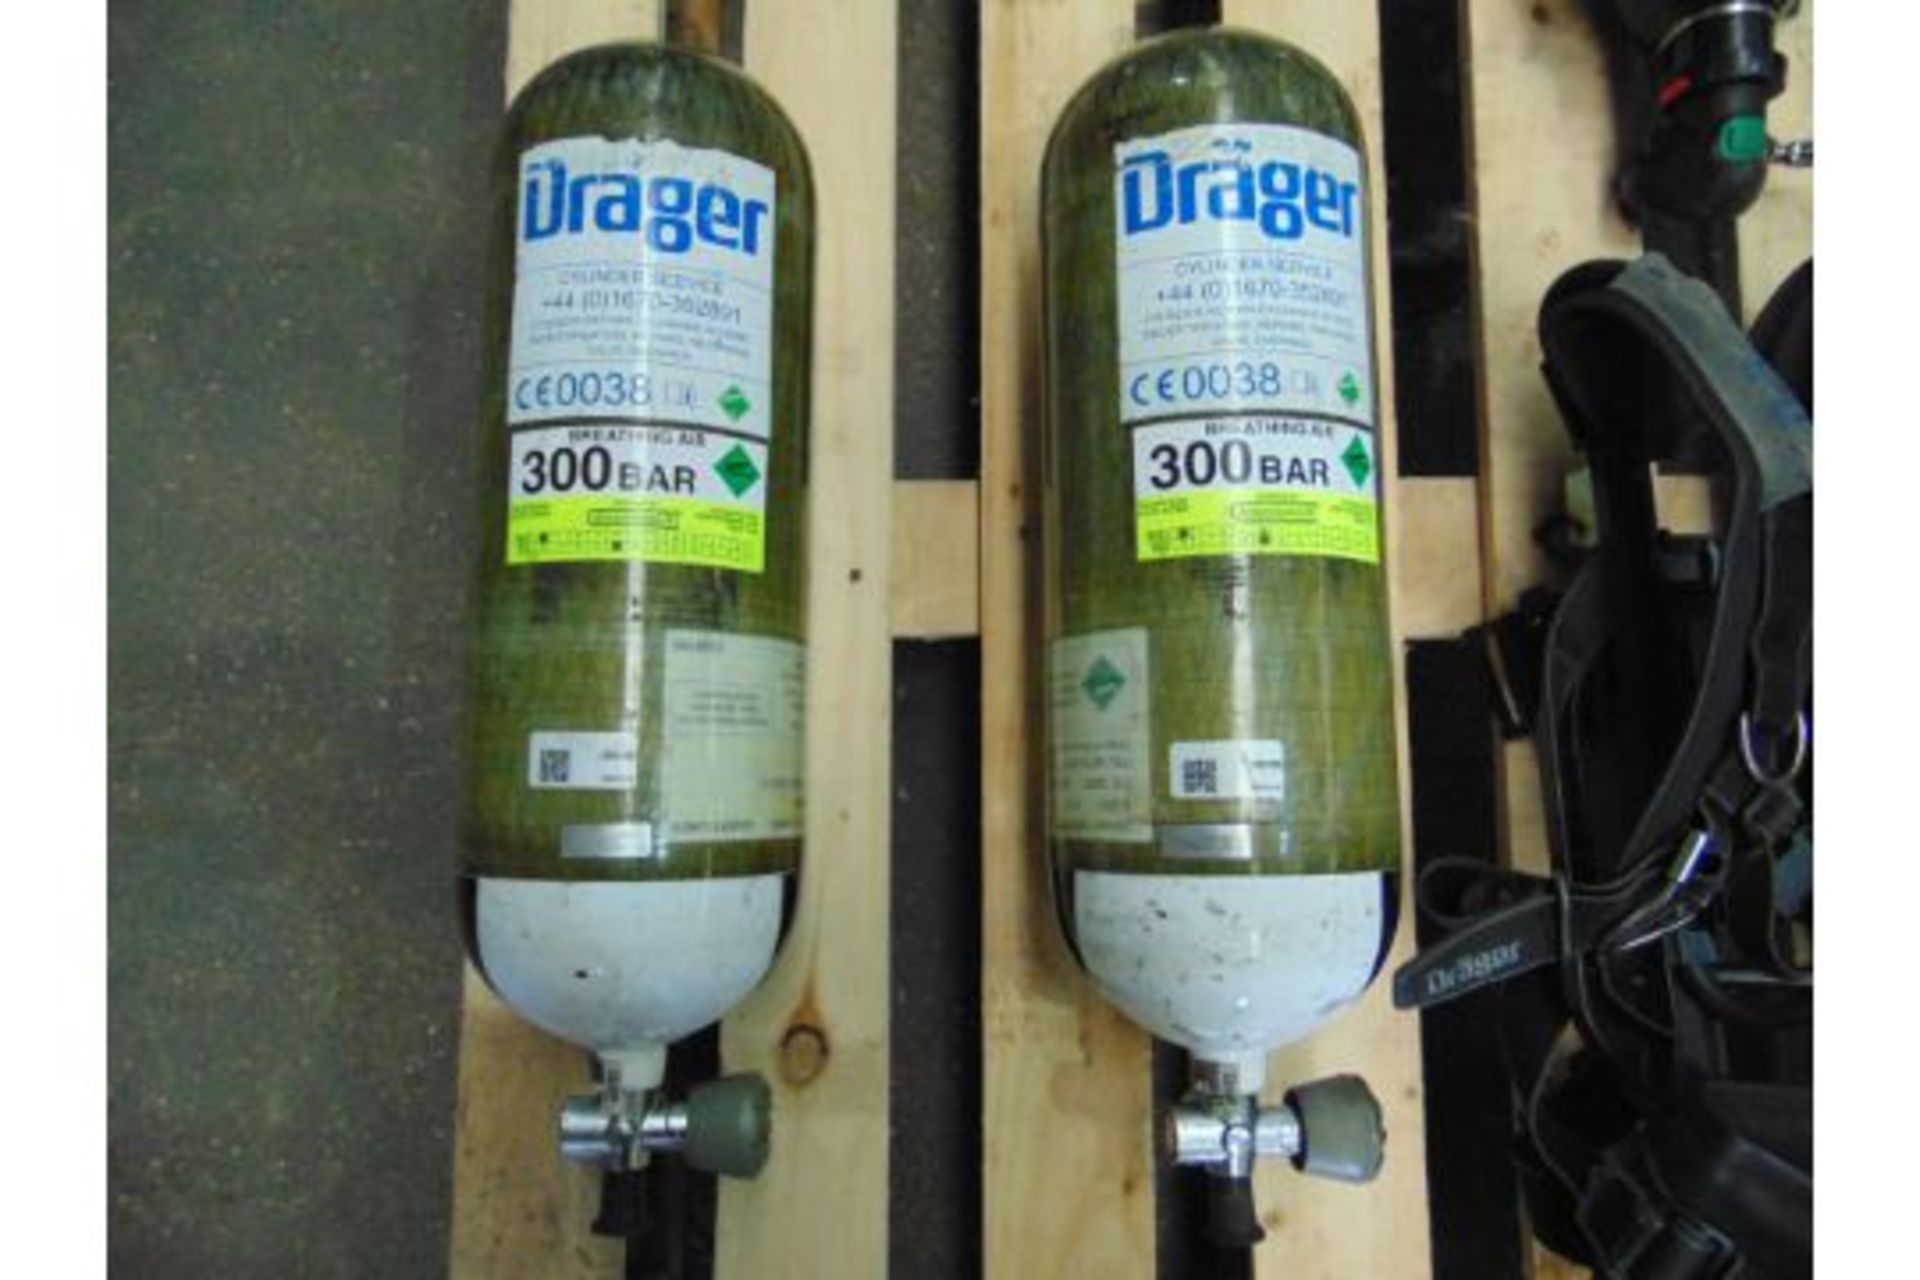 Drager PSS 7000 Self Contained Breathing Apparatus w/ 2 x Drager 300 Bar Air Cylinders - Image 3 of 18